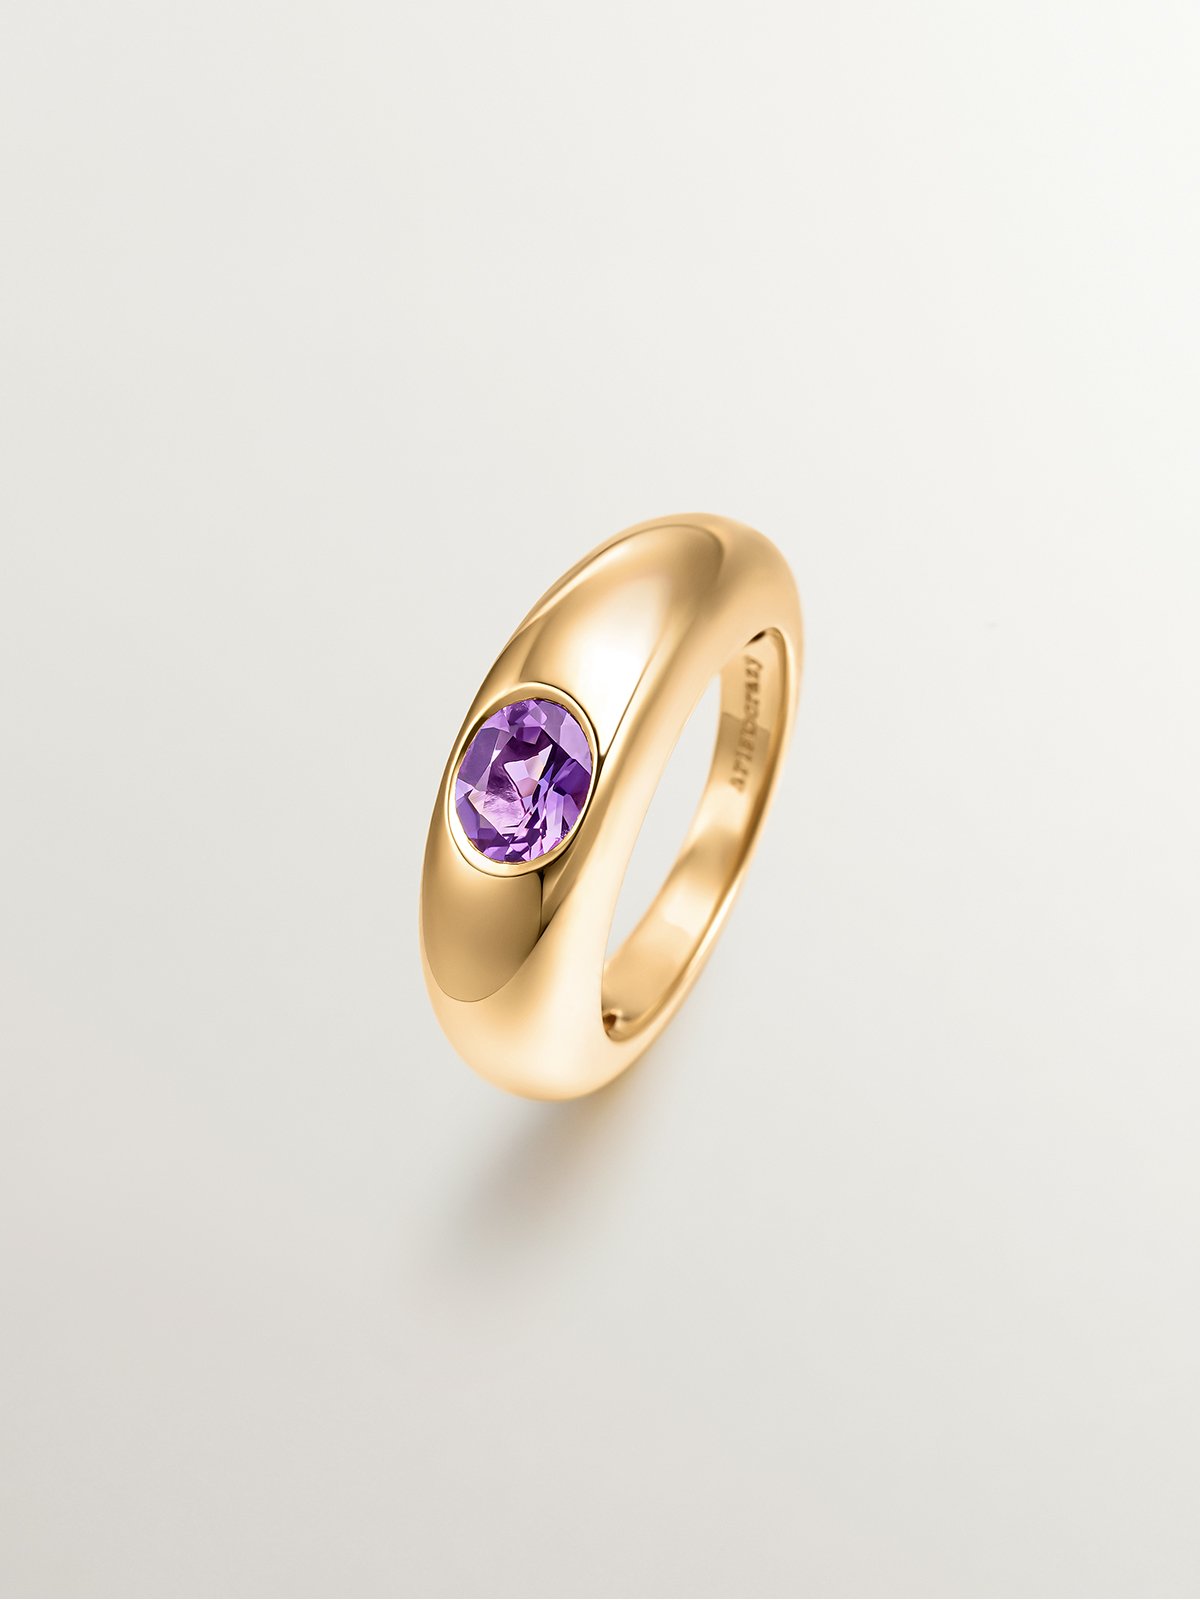 18K yellow gold plated 925 silver ring with purple amethyst